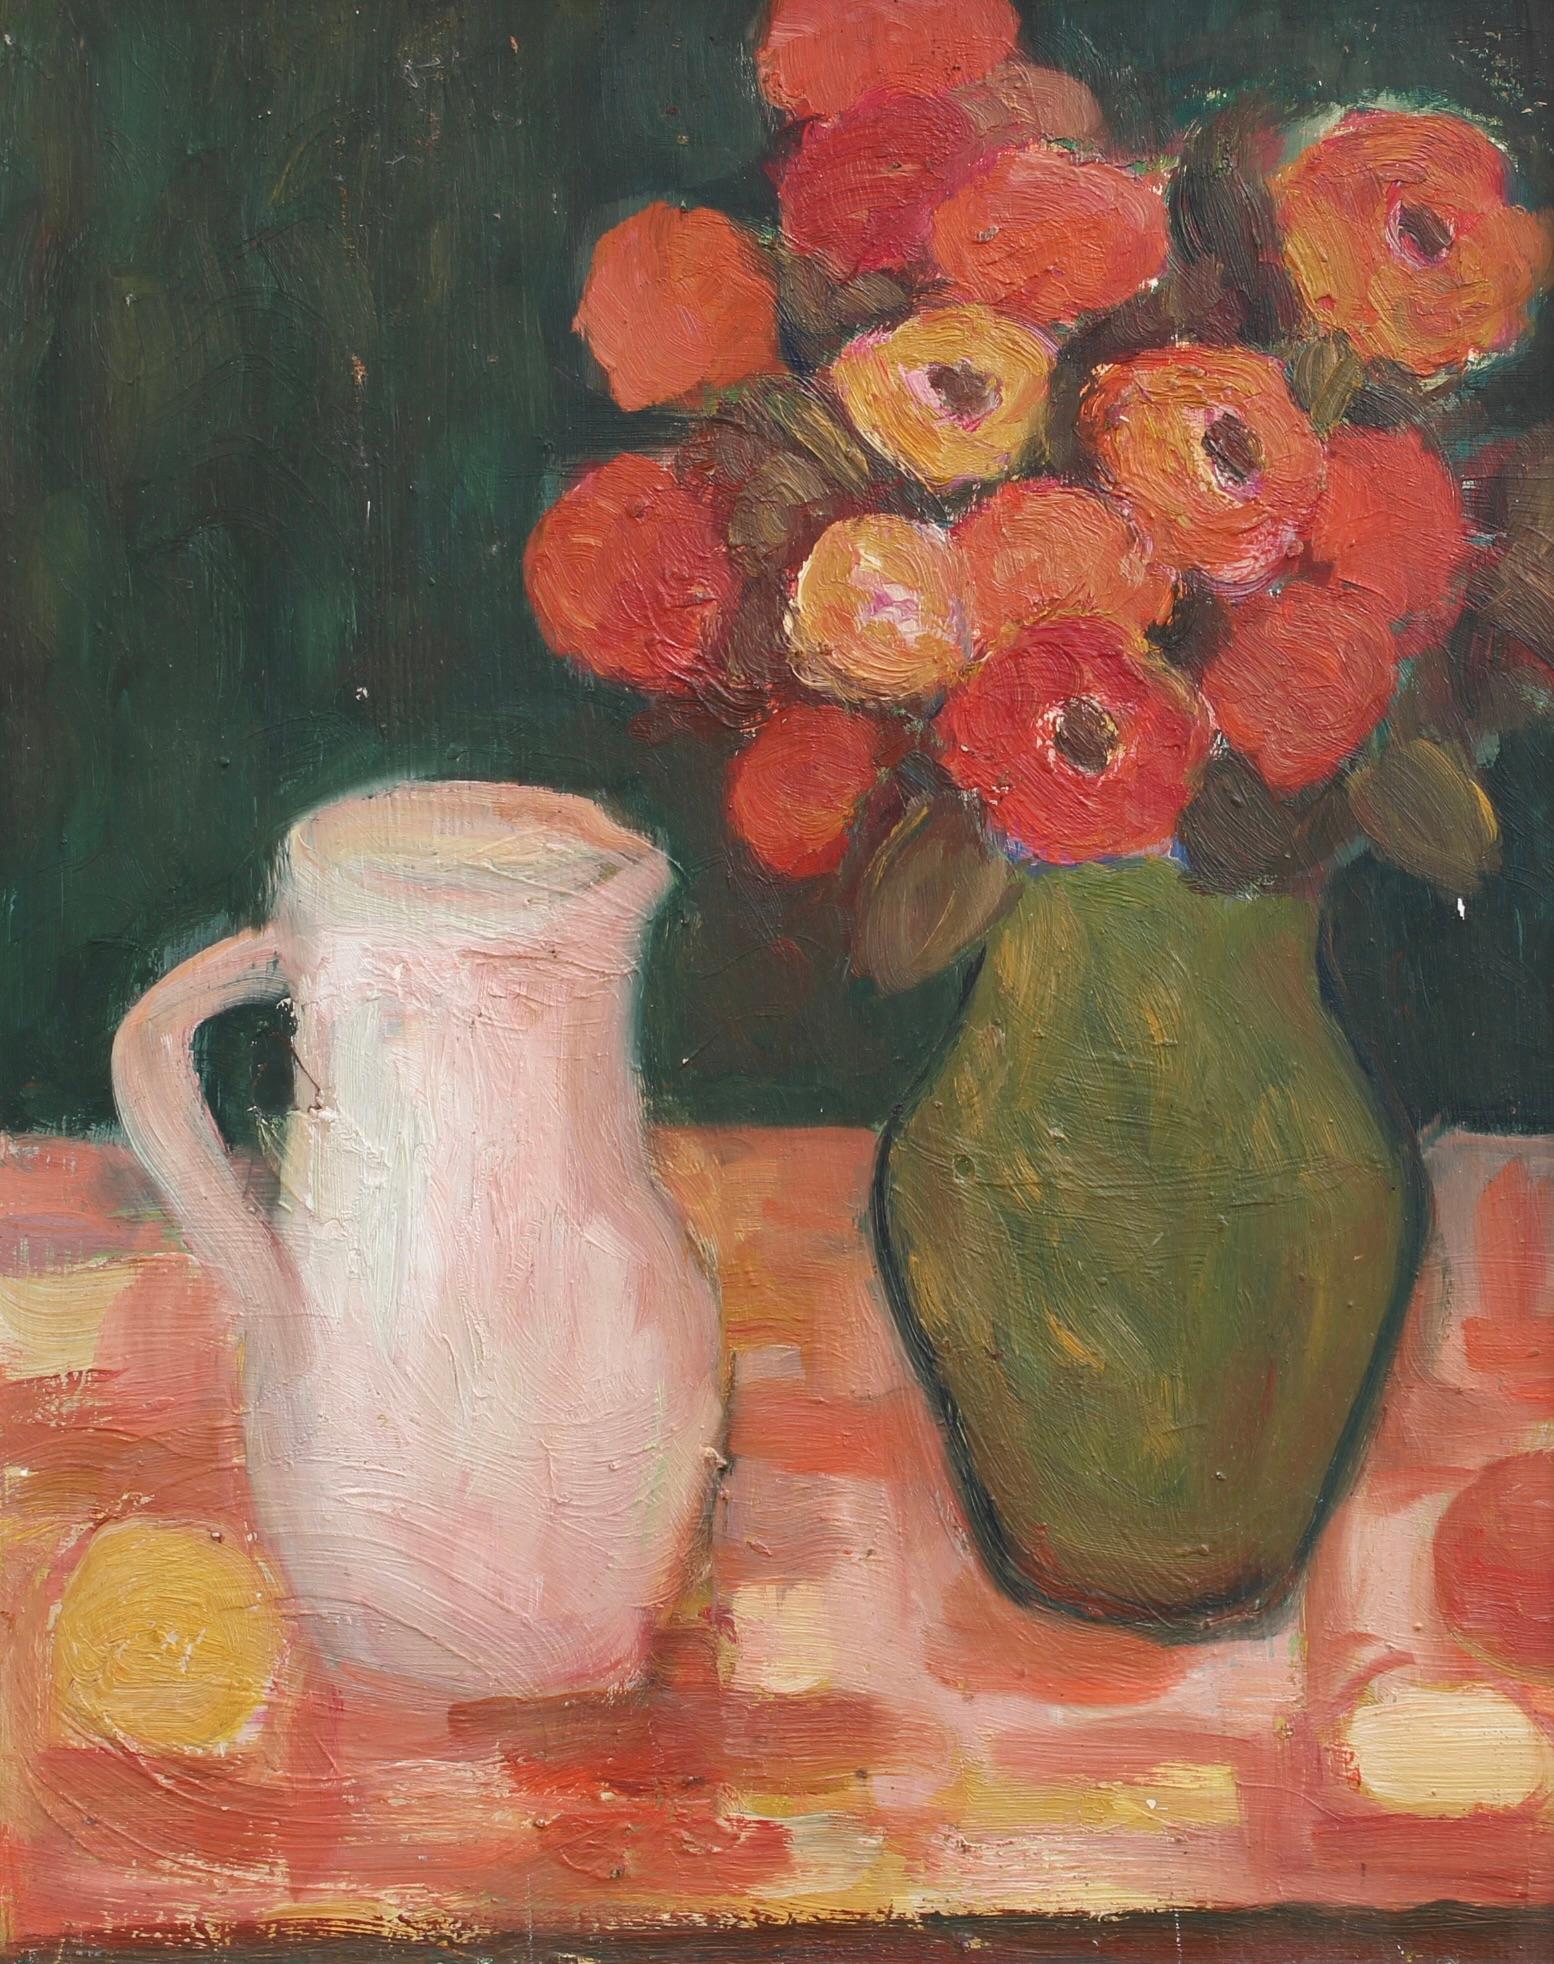 'Still Life with Pitcher and Flowers', oil on board, by Anna Costa (circa 1960s). In addition to her many landscapes, Costa painted many still lifes, mostly bouquets of flowers as subject. This lovely arrangement consists of a white pitcher